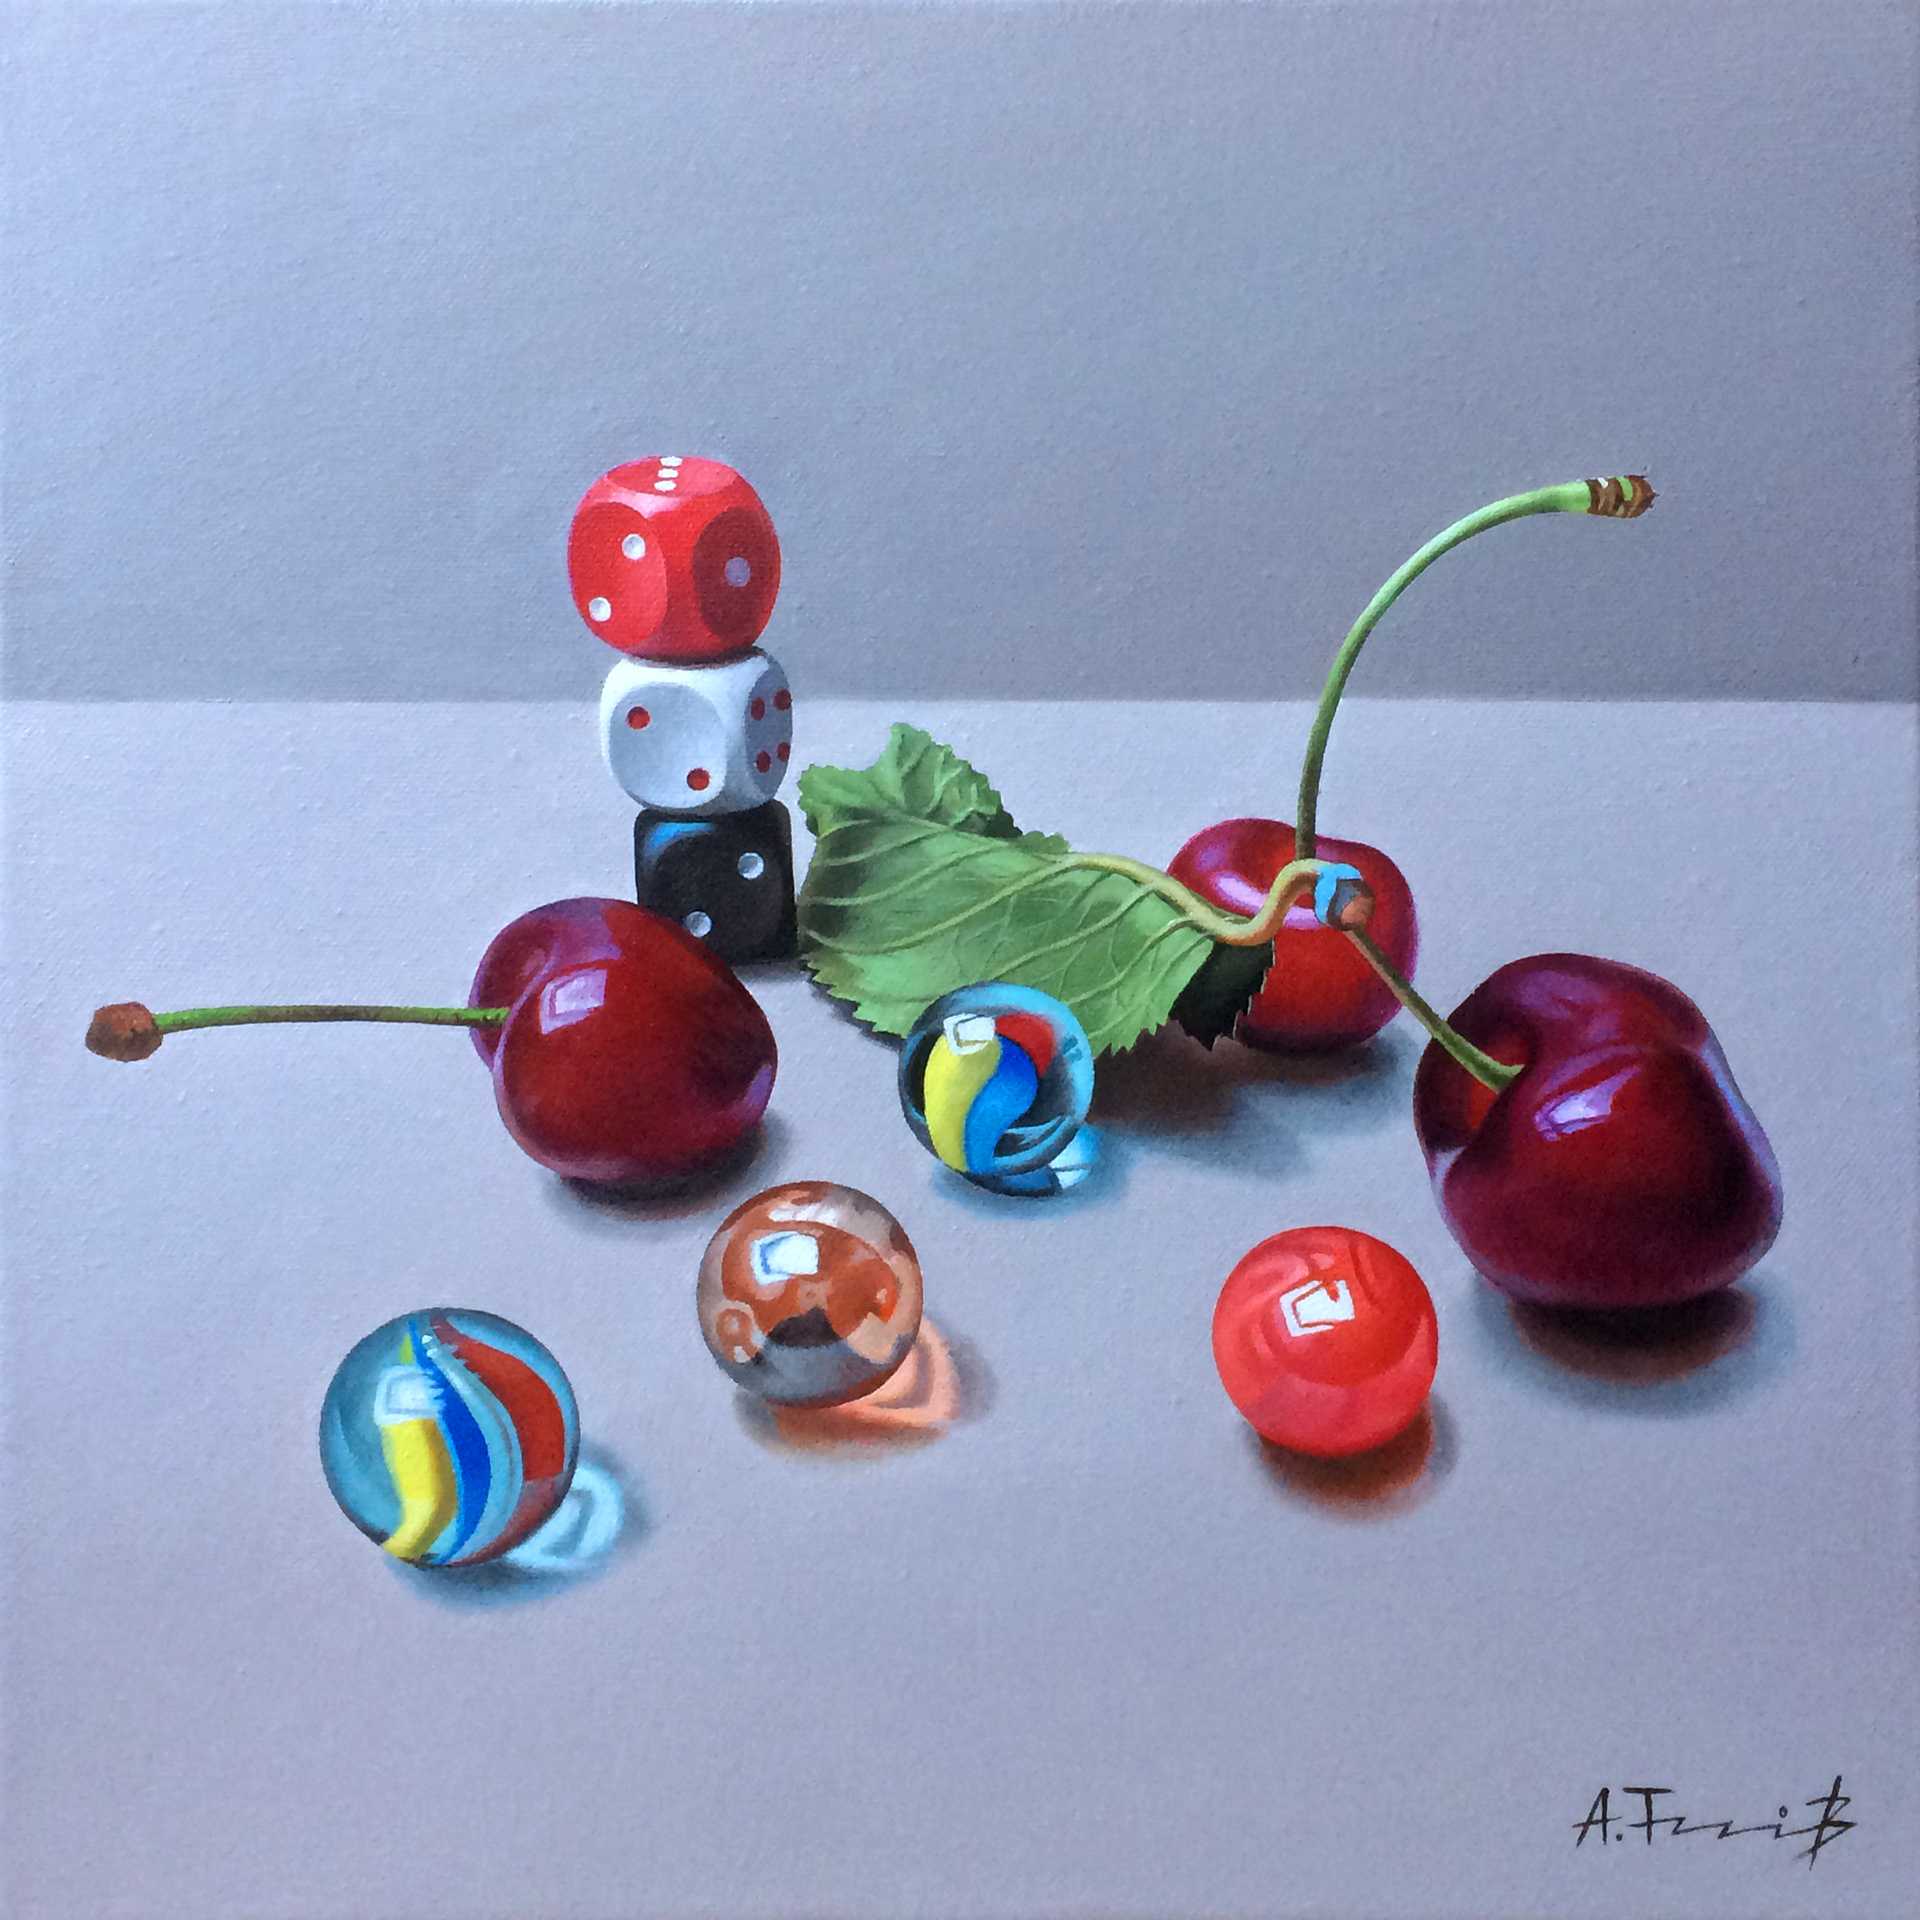 Cherries and Marbles